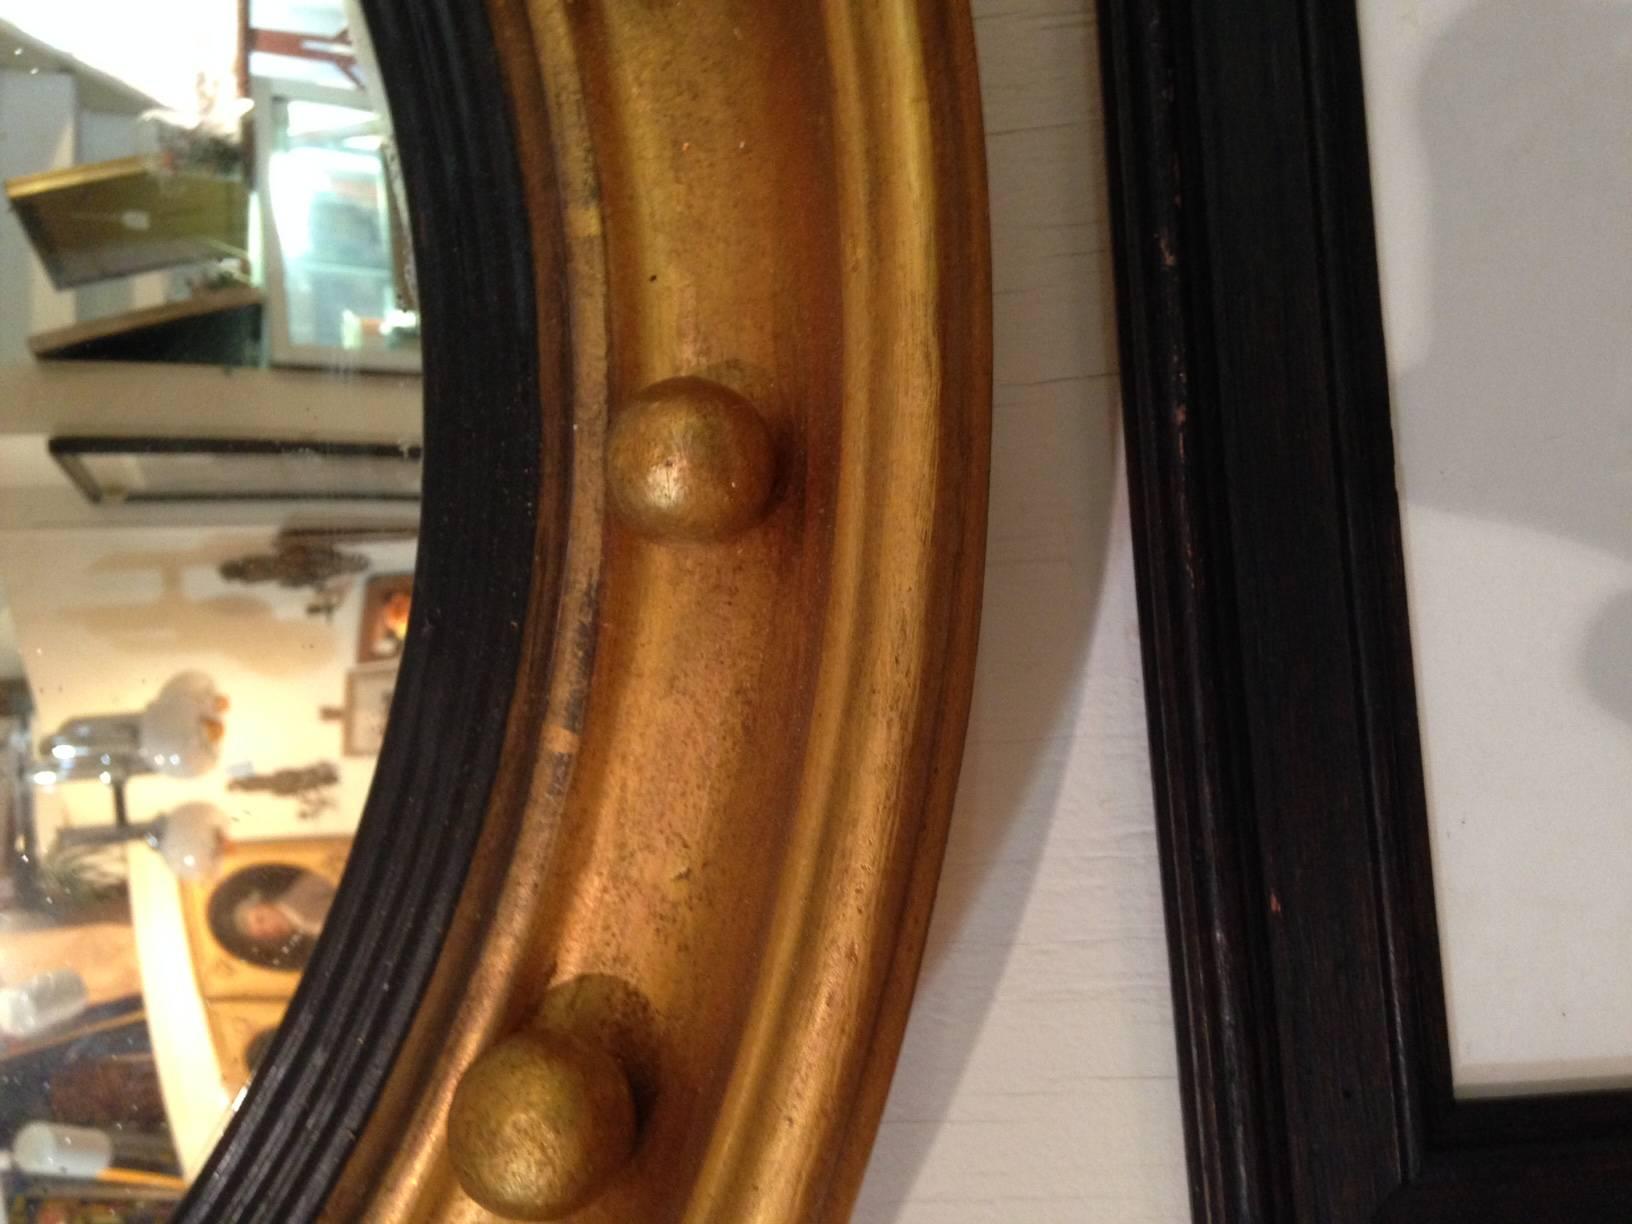 English Regency gilt bullseye mirror, circa 1820-1830, the deep frame with a series of spherules encircling an ebonized and reeded liner and a convex mirror glass. Glass appears to be original; gilt has been refreshed. Minor shrinkage cracks